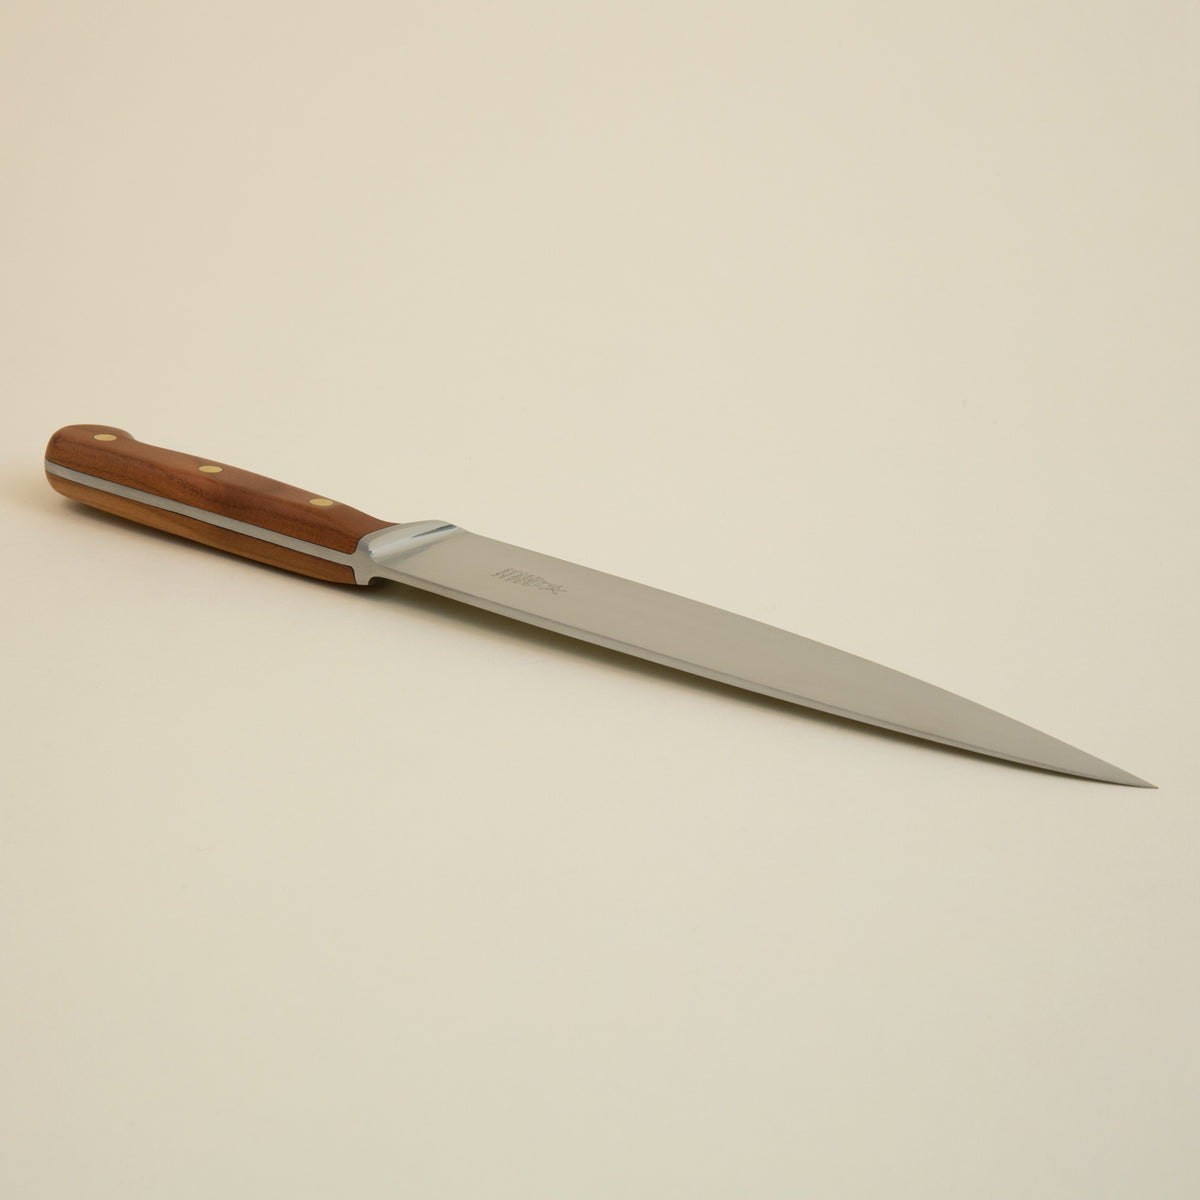 Traditional Cooking Knife L - Plum